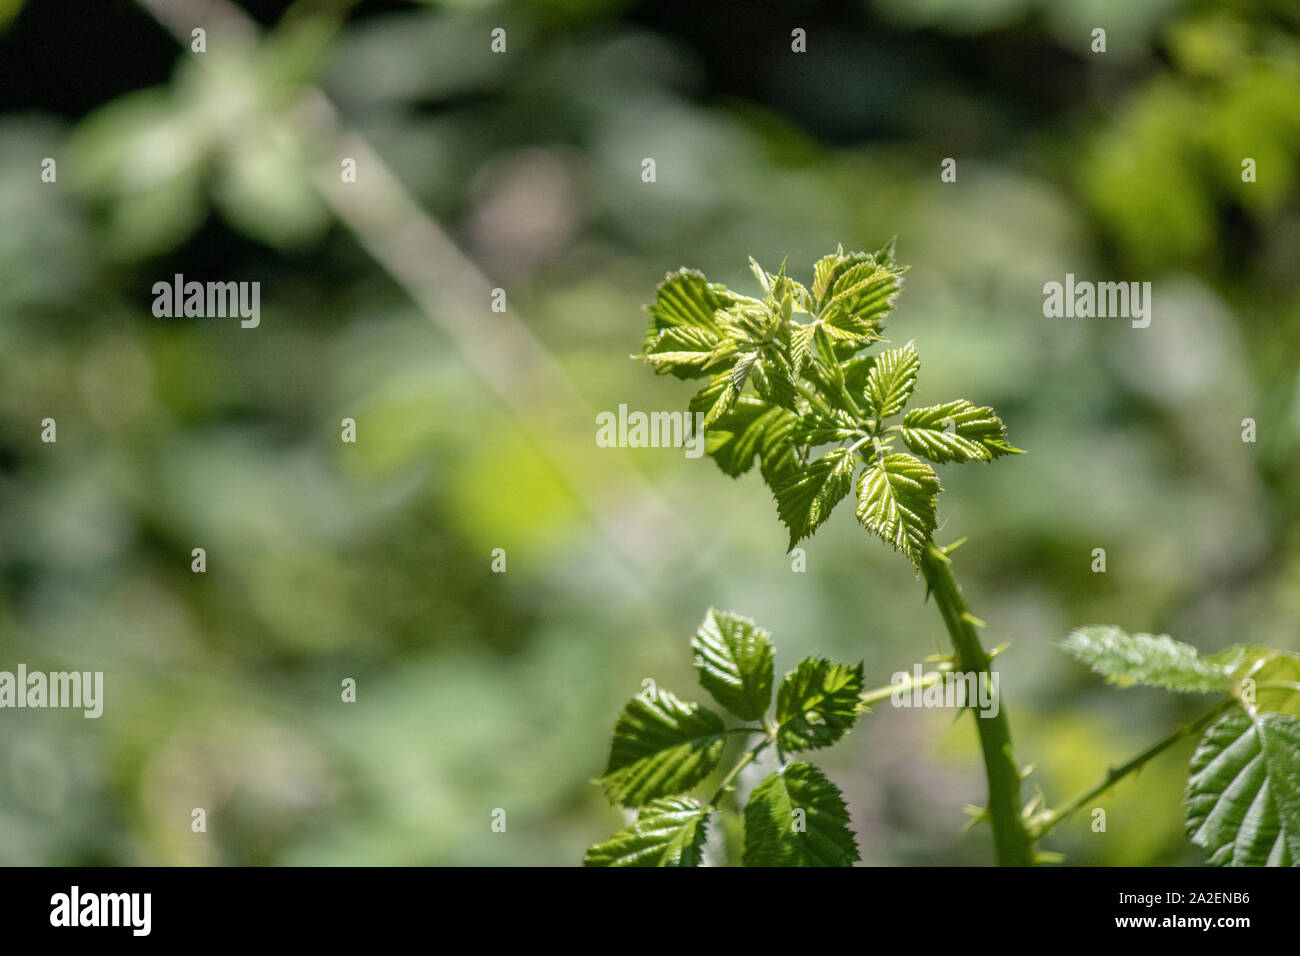 Close-up of the leaves of Rubus boraeanus (blackberry) plant. Small leaves close-up. Stock Photo